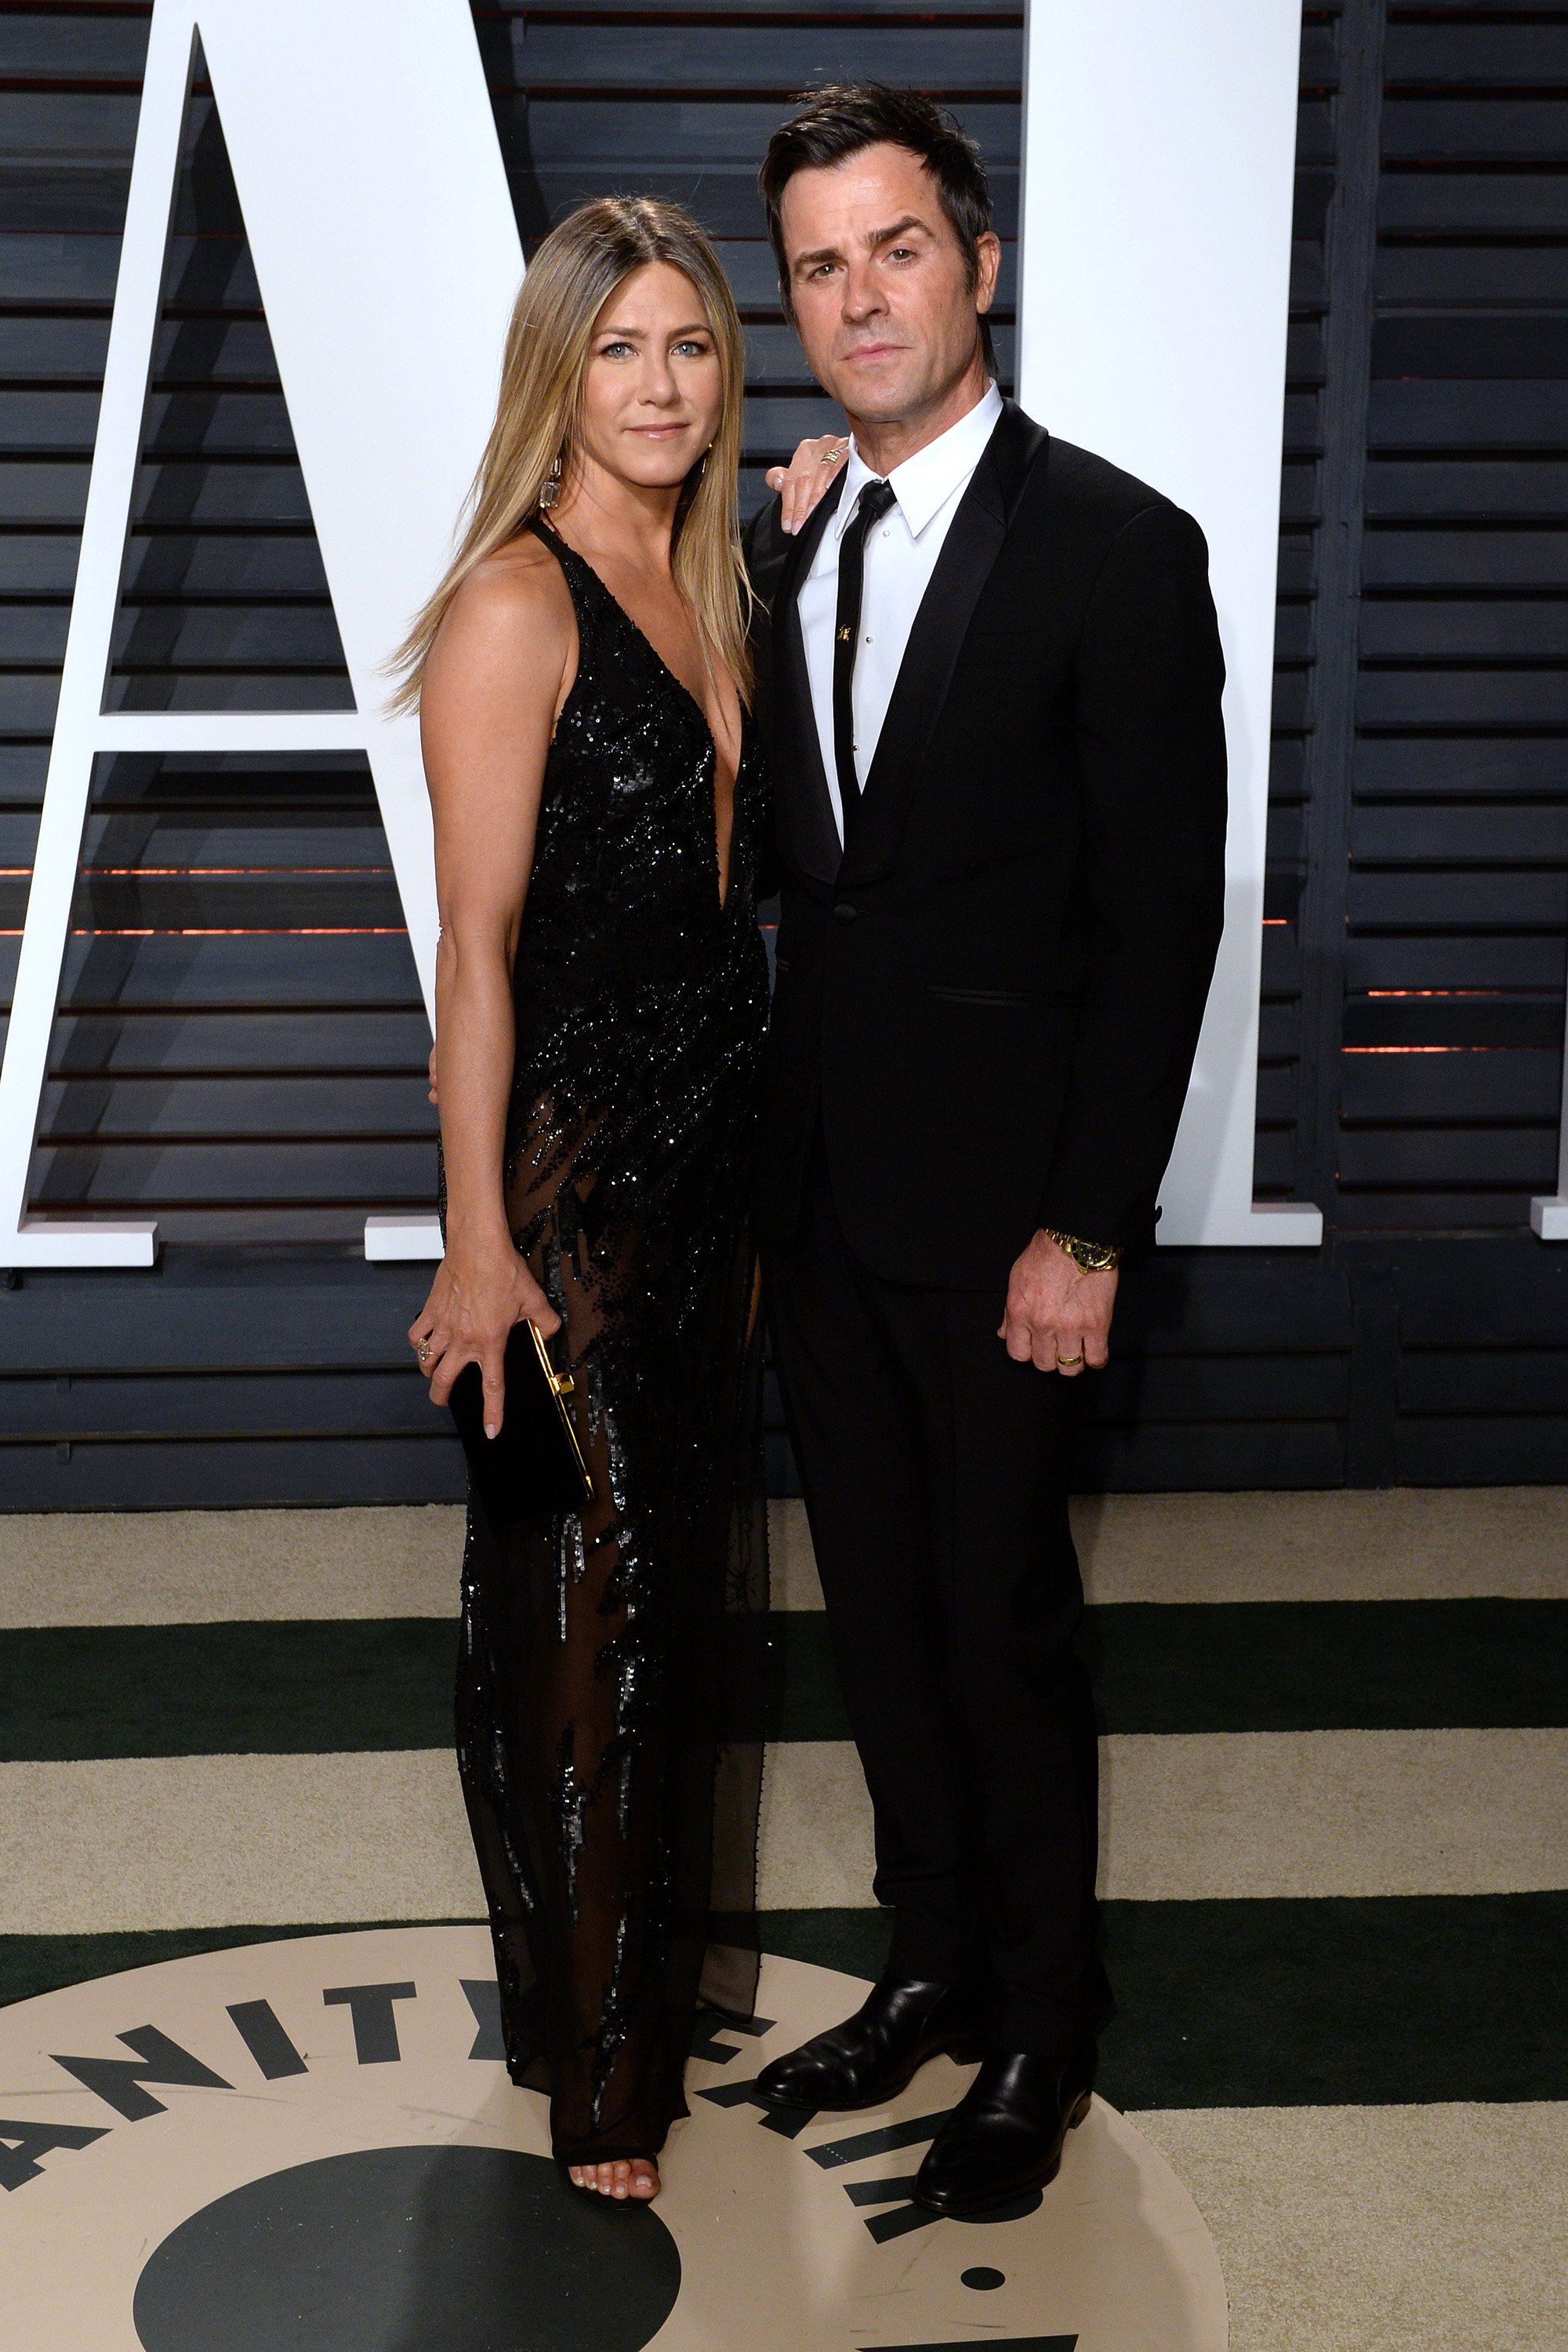 Justin Theroux and Jennifer Aniston attend the 2017 Vanity Fair Oscar Party. | Source: Getty Images